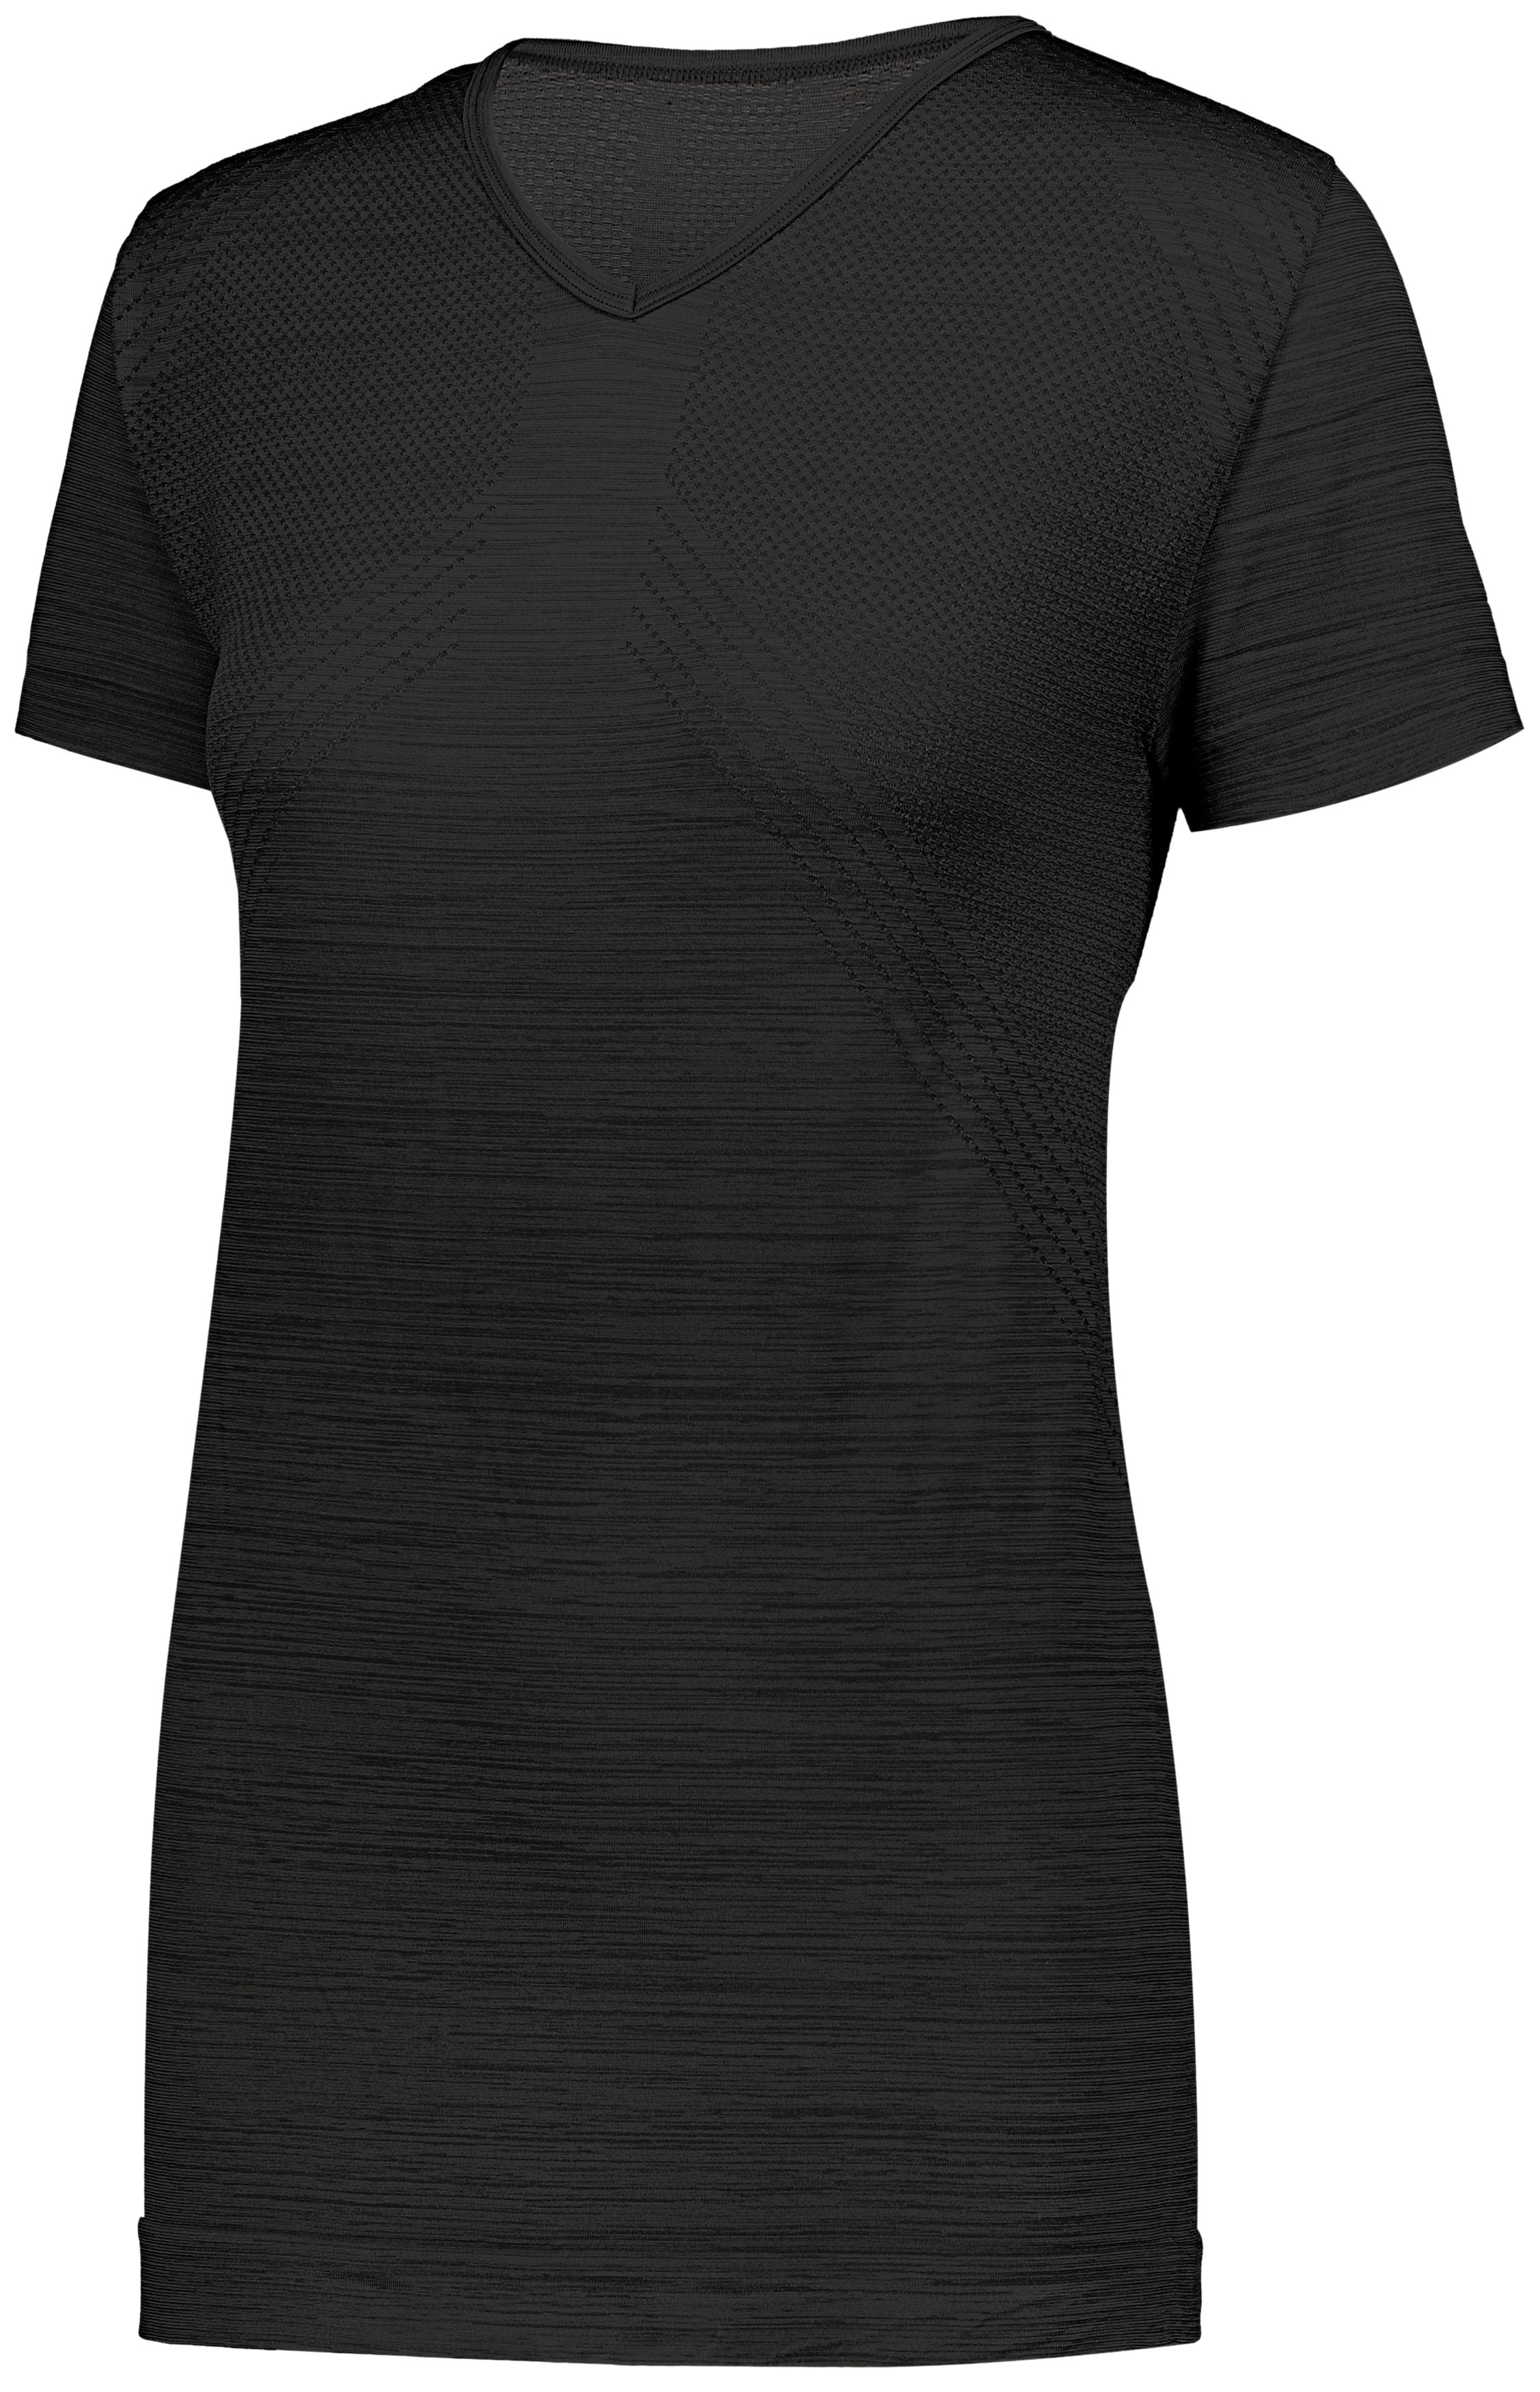 Holloway Ladies Striated Shirt Short Sleeve in Black  -Part of the Ladies, Holloway, Shirts, Striated-Collection product lines at KanaleyCreations.com